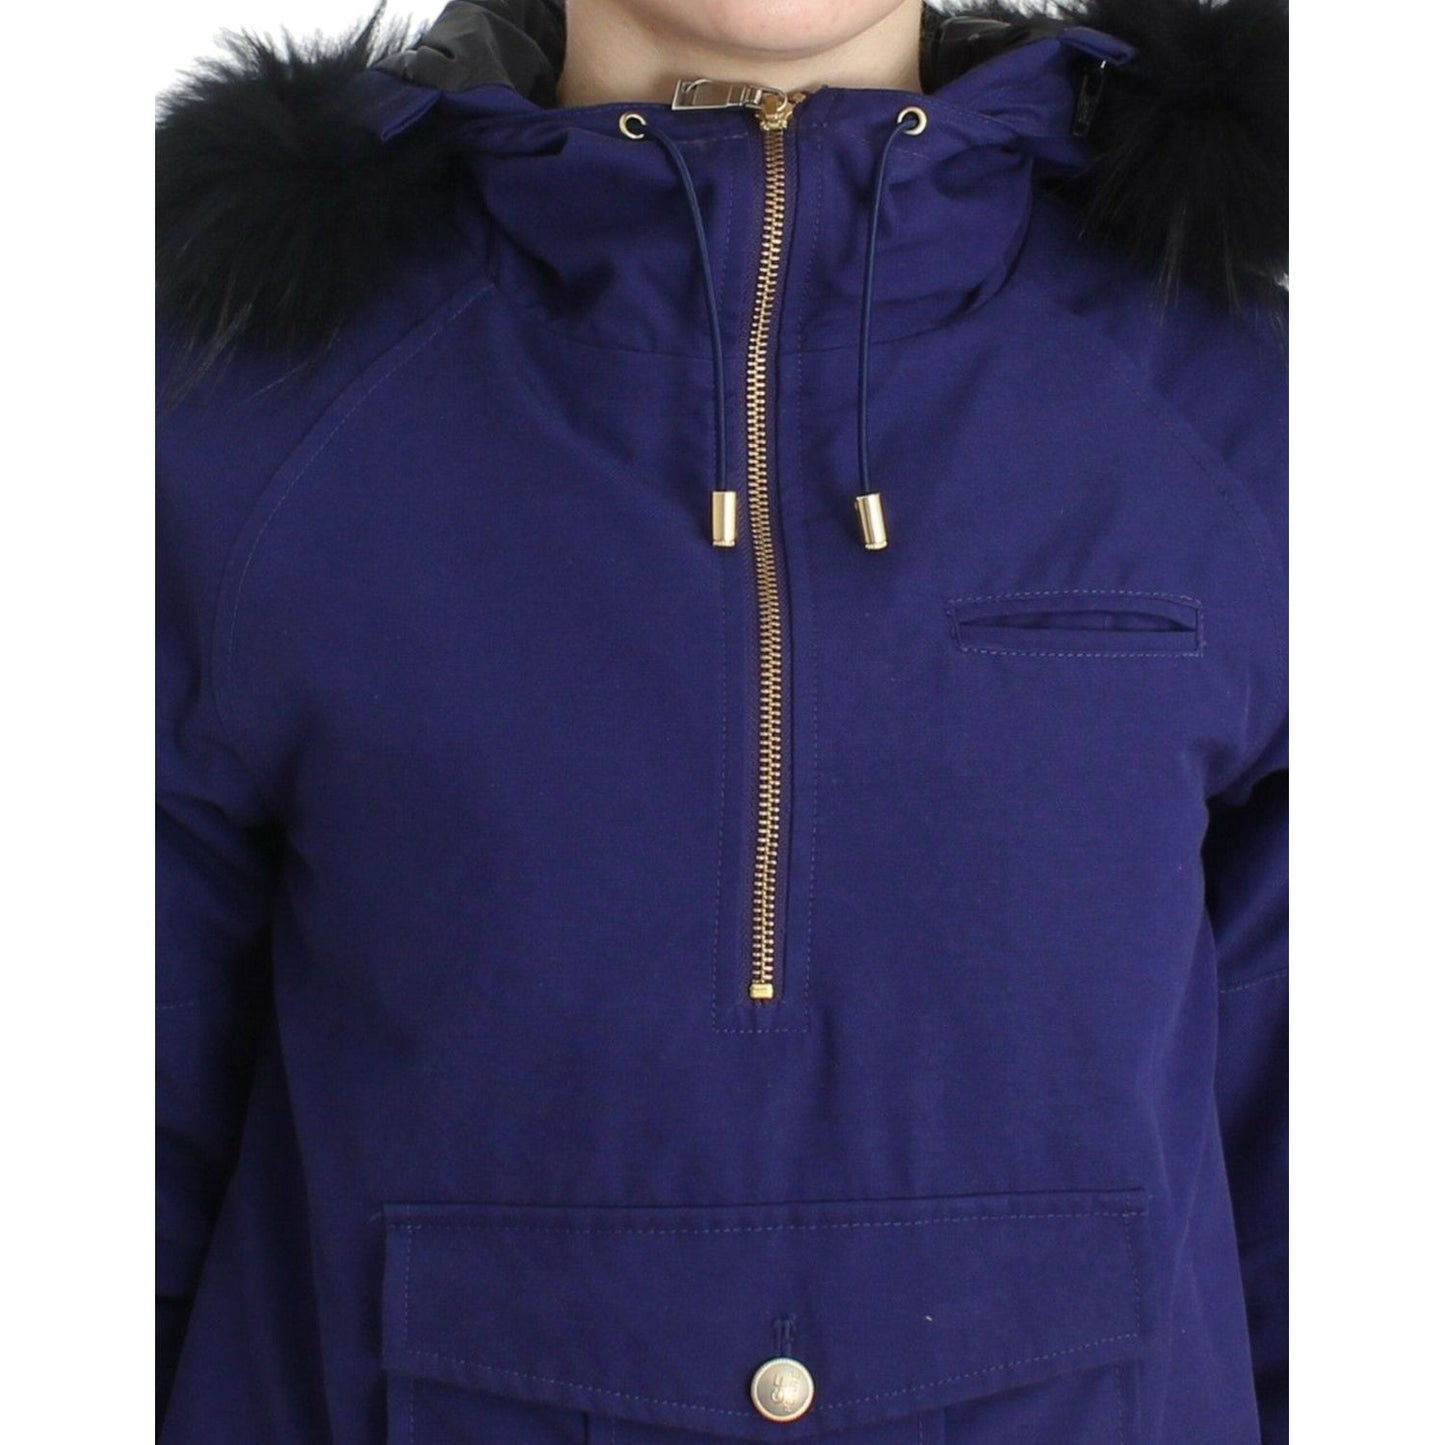 GF Ferre Chic Blue K-Way Jacket with Faux Fur Accent Coats & Jackets blue-padded-jacket-hooded-short-k-way